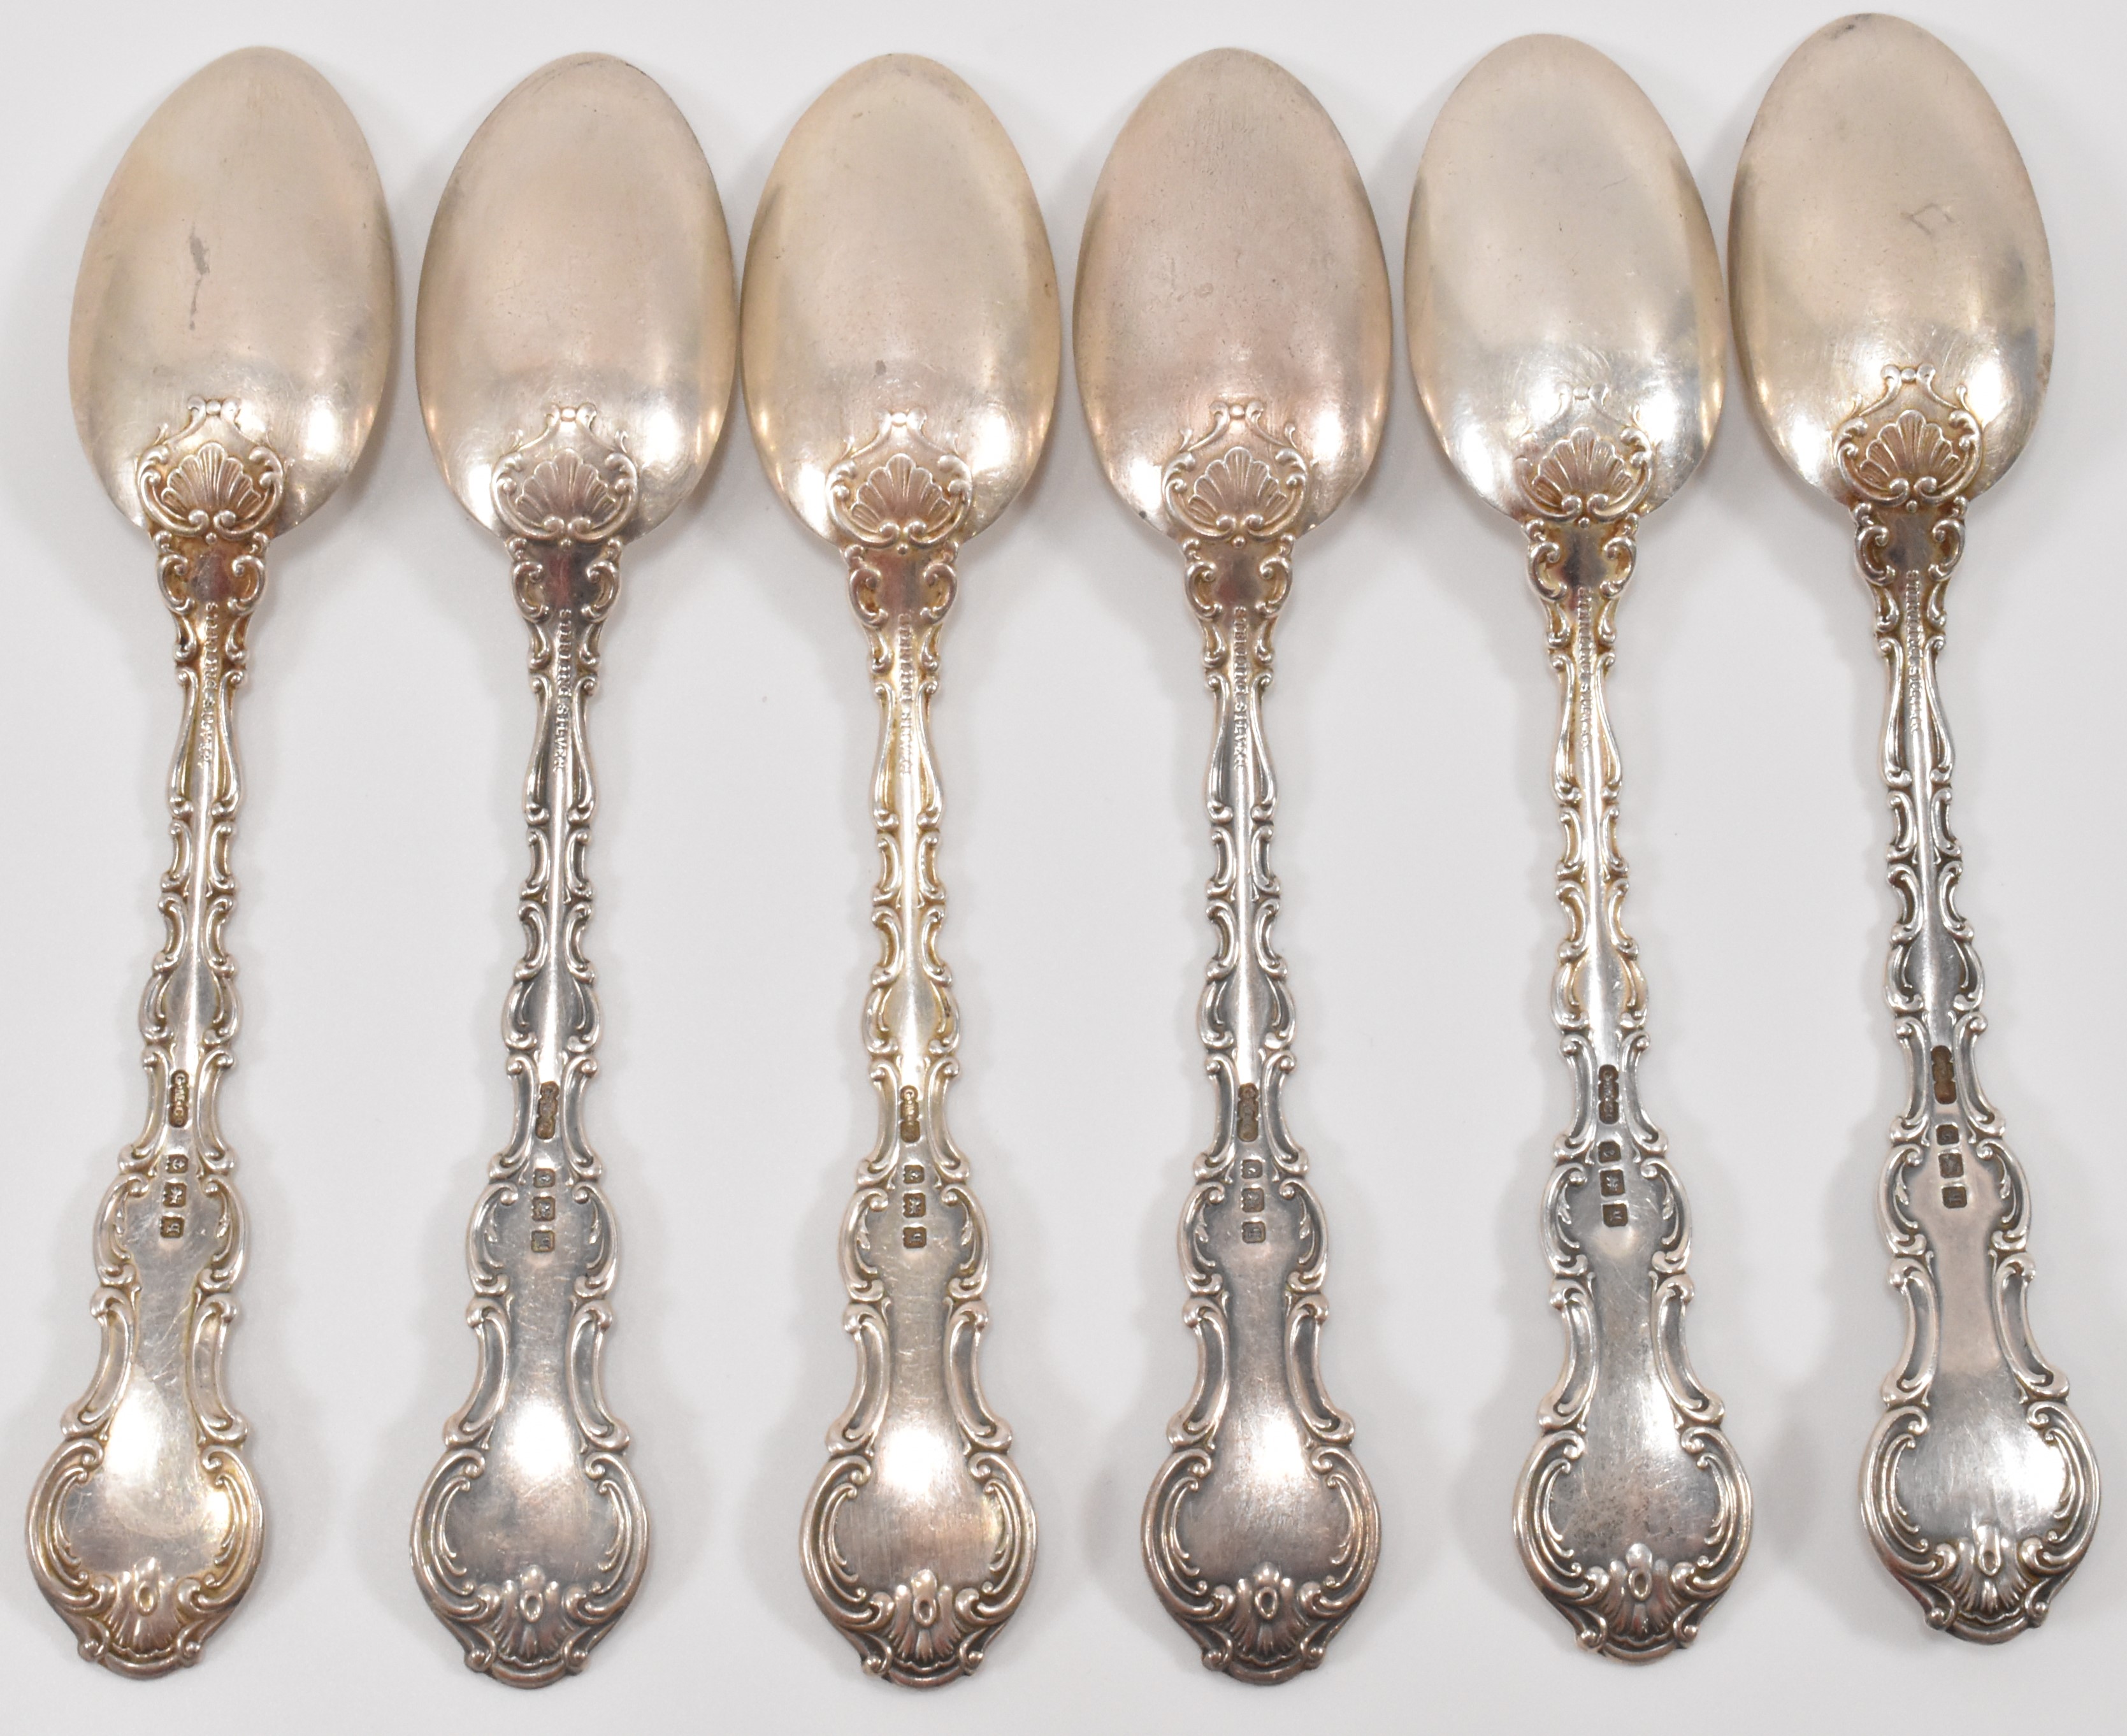 SET OF SIX GORHAM MANUFACTURING CO SILVER SPOONS - Image 4 of 4